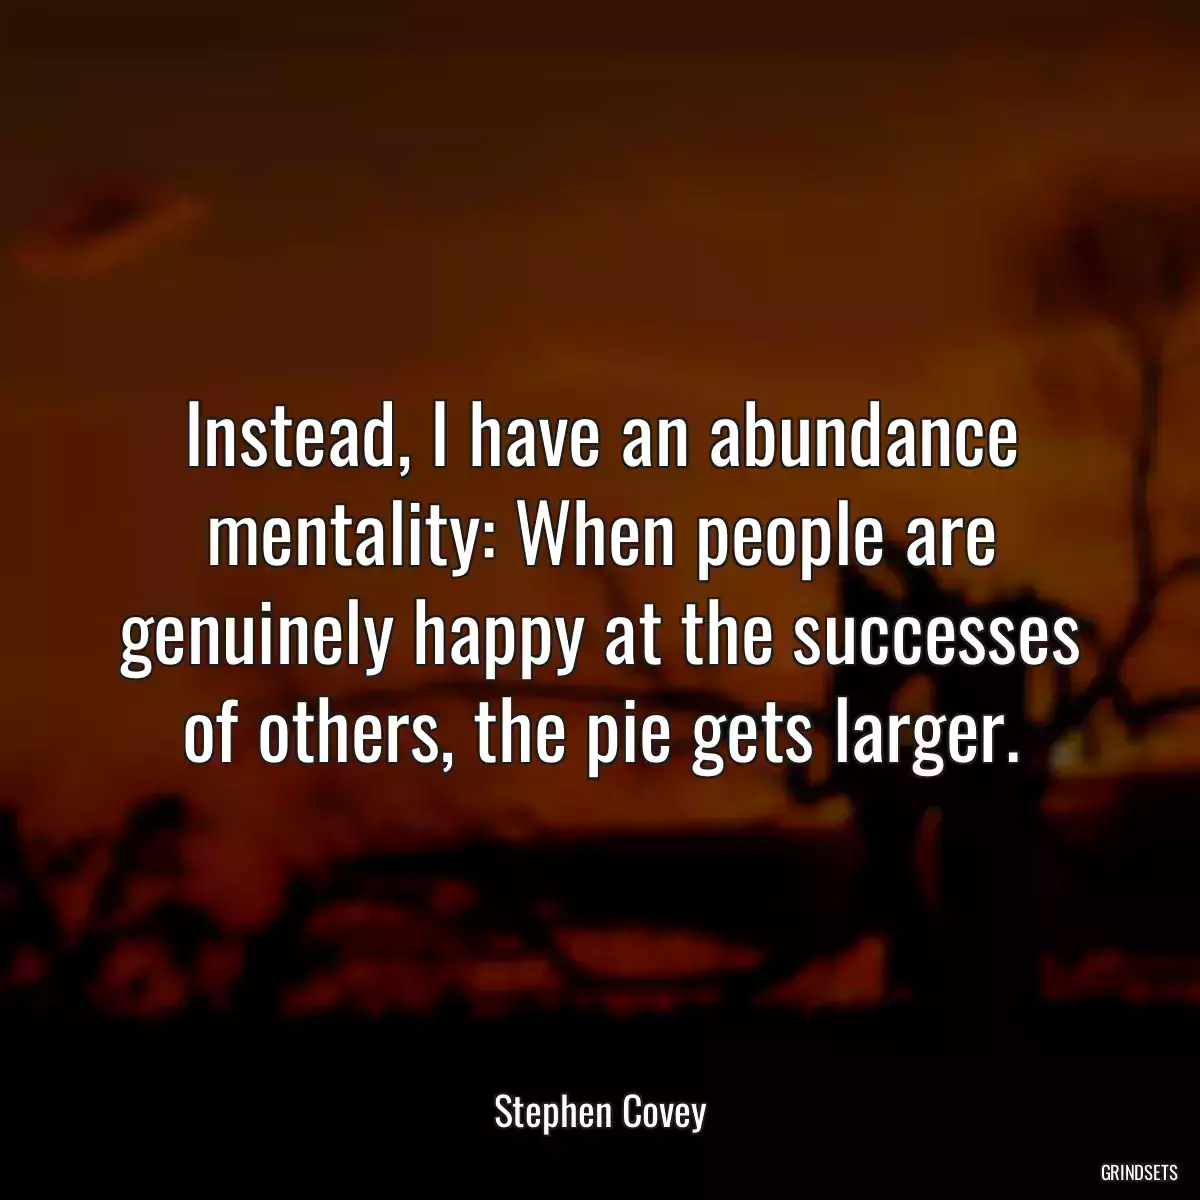 Instead, I have an abundance mentality: When people are genuinely happy at the successes of others, the pie gets larger.